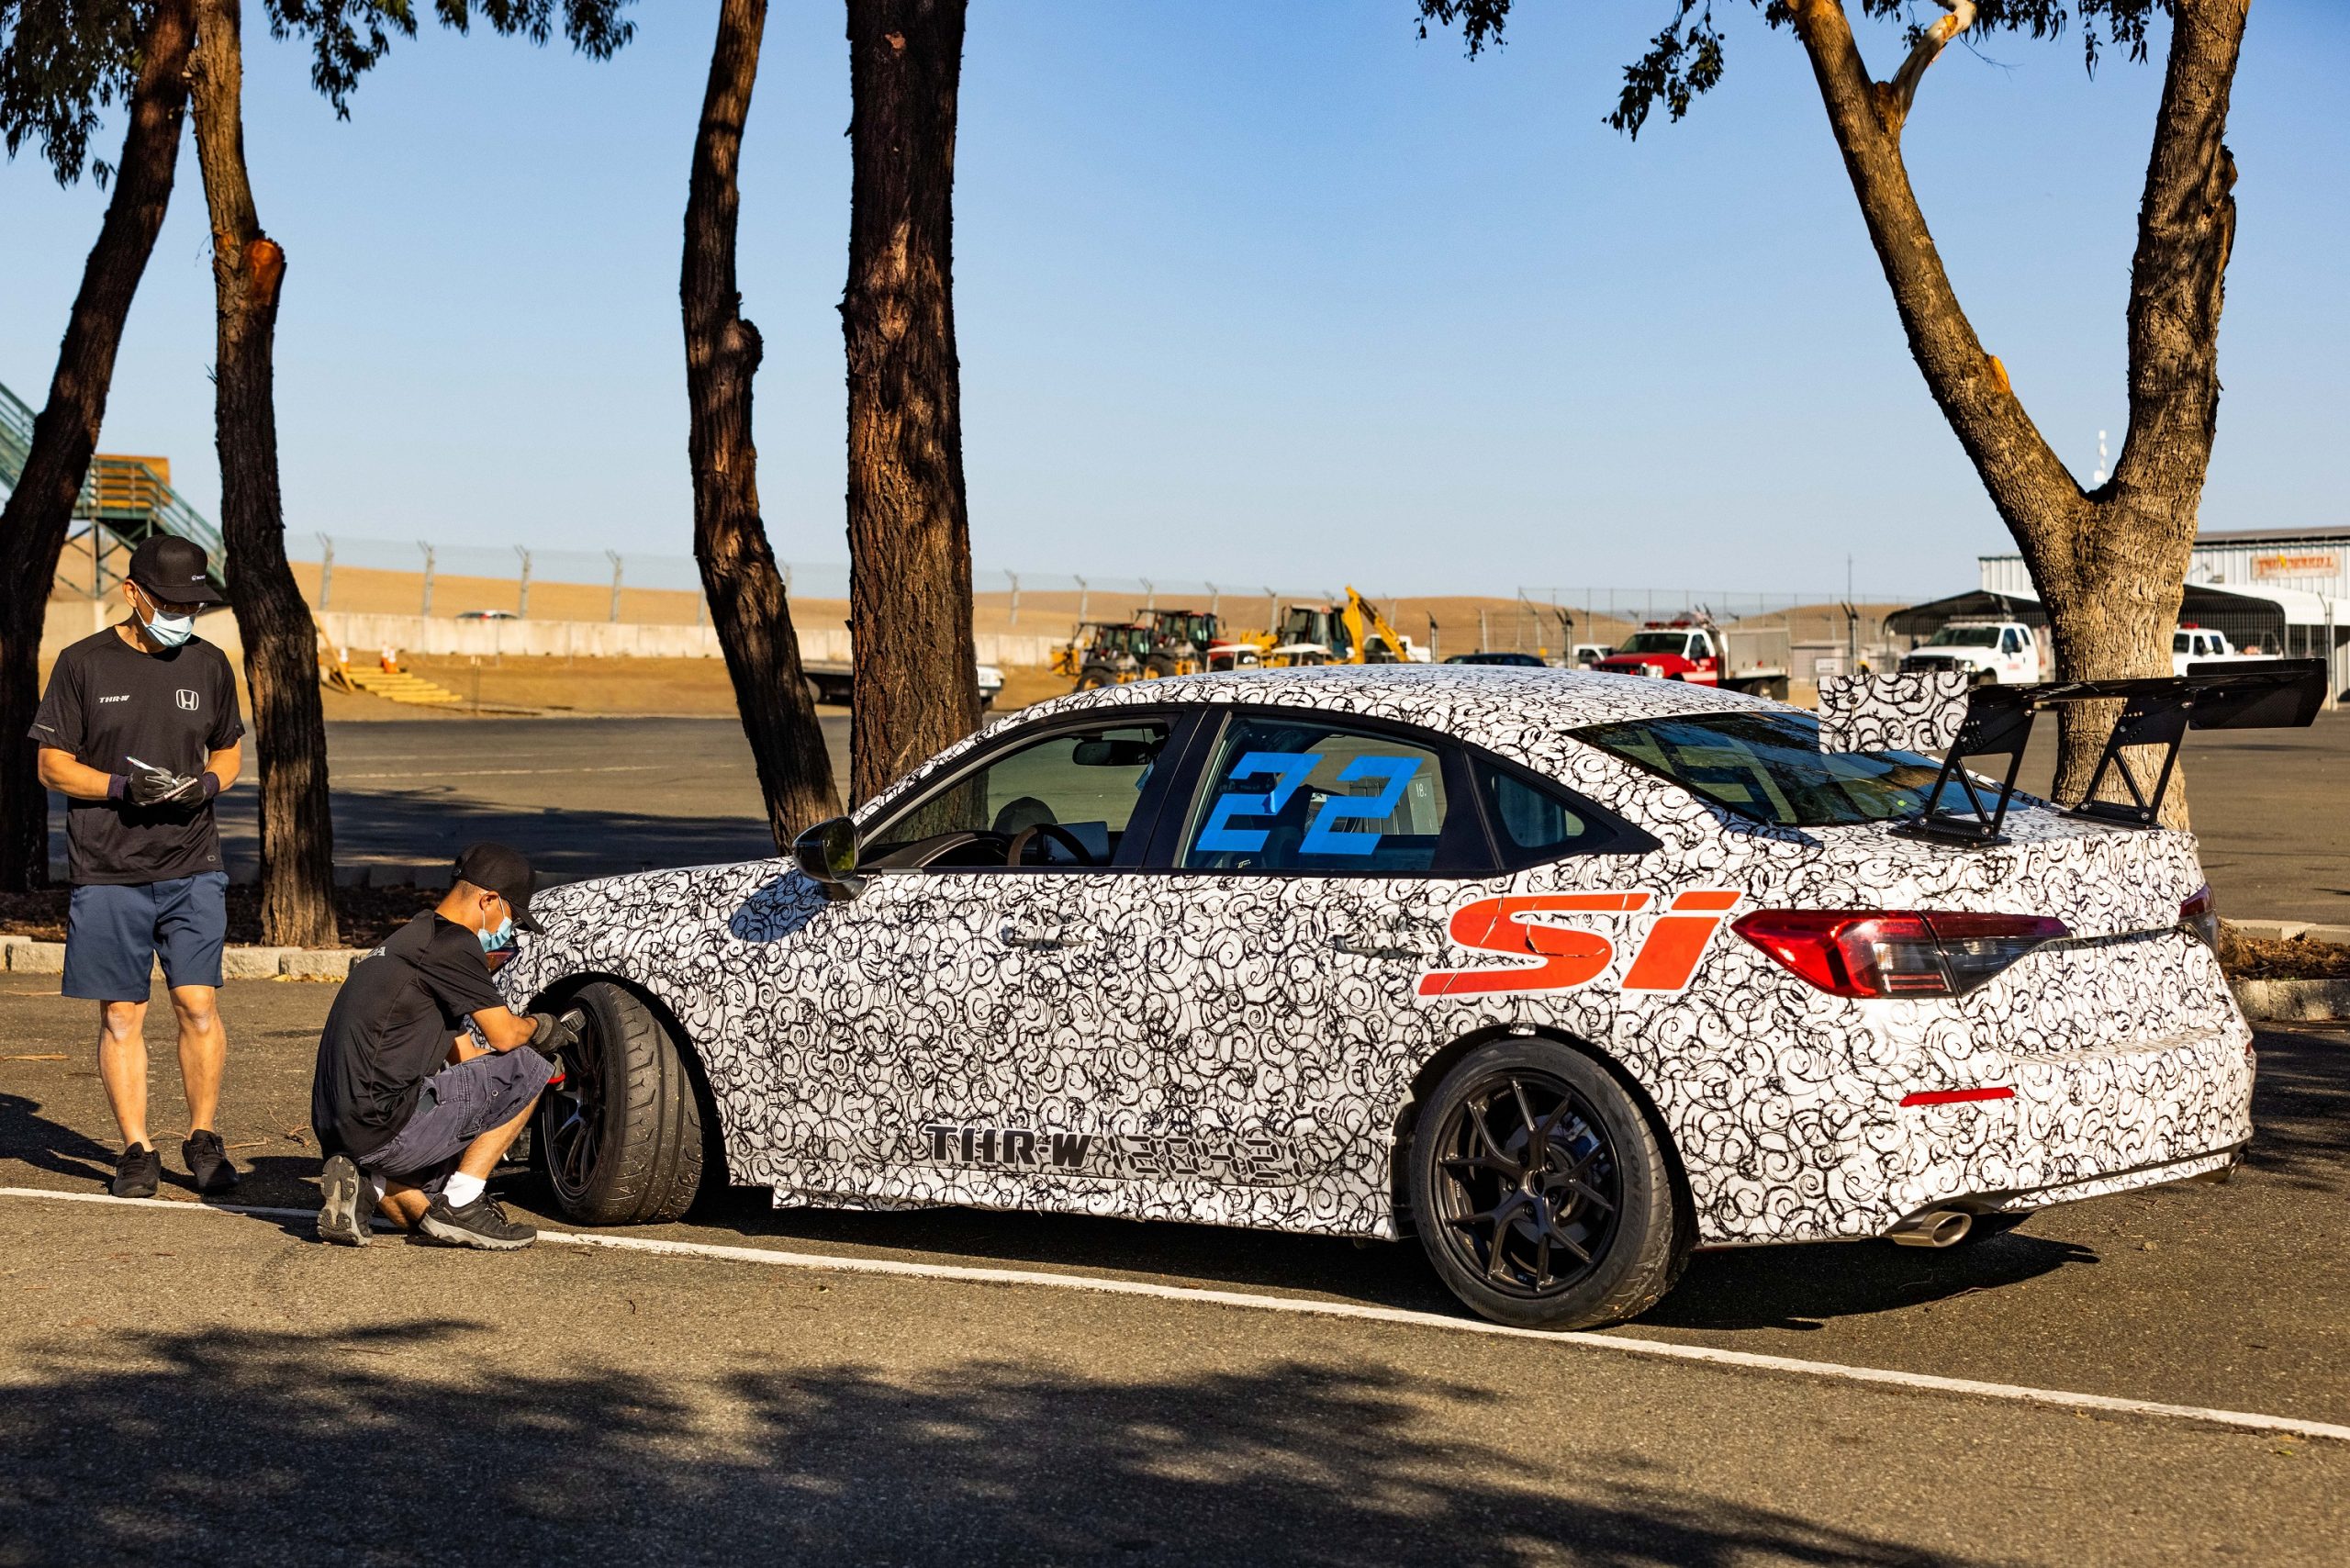 The white camo 2022 Civic Si gets its tires changed at a race track